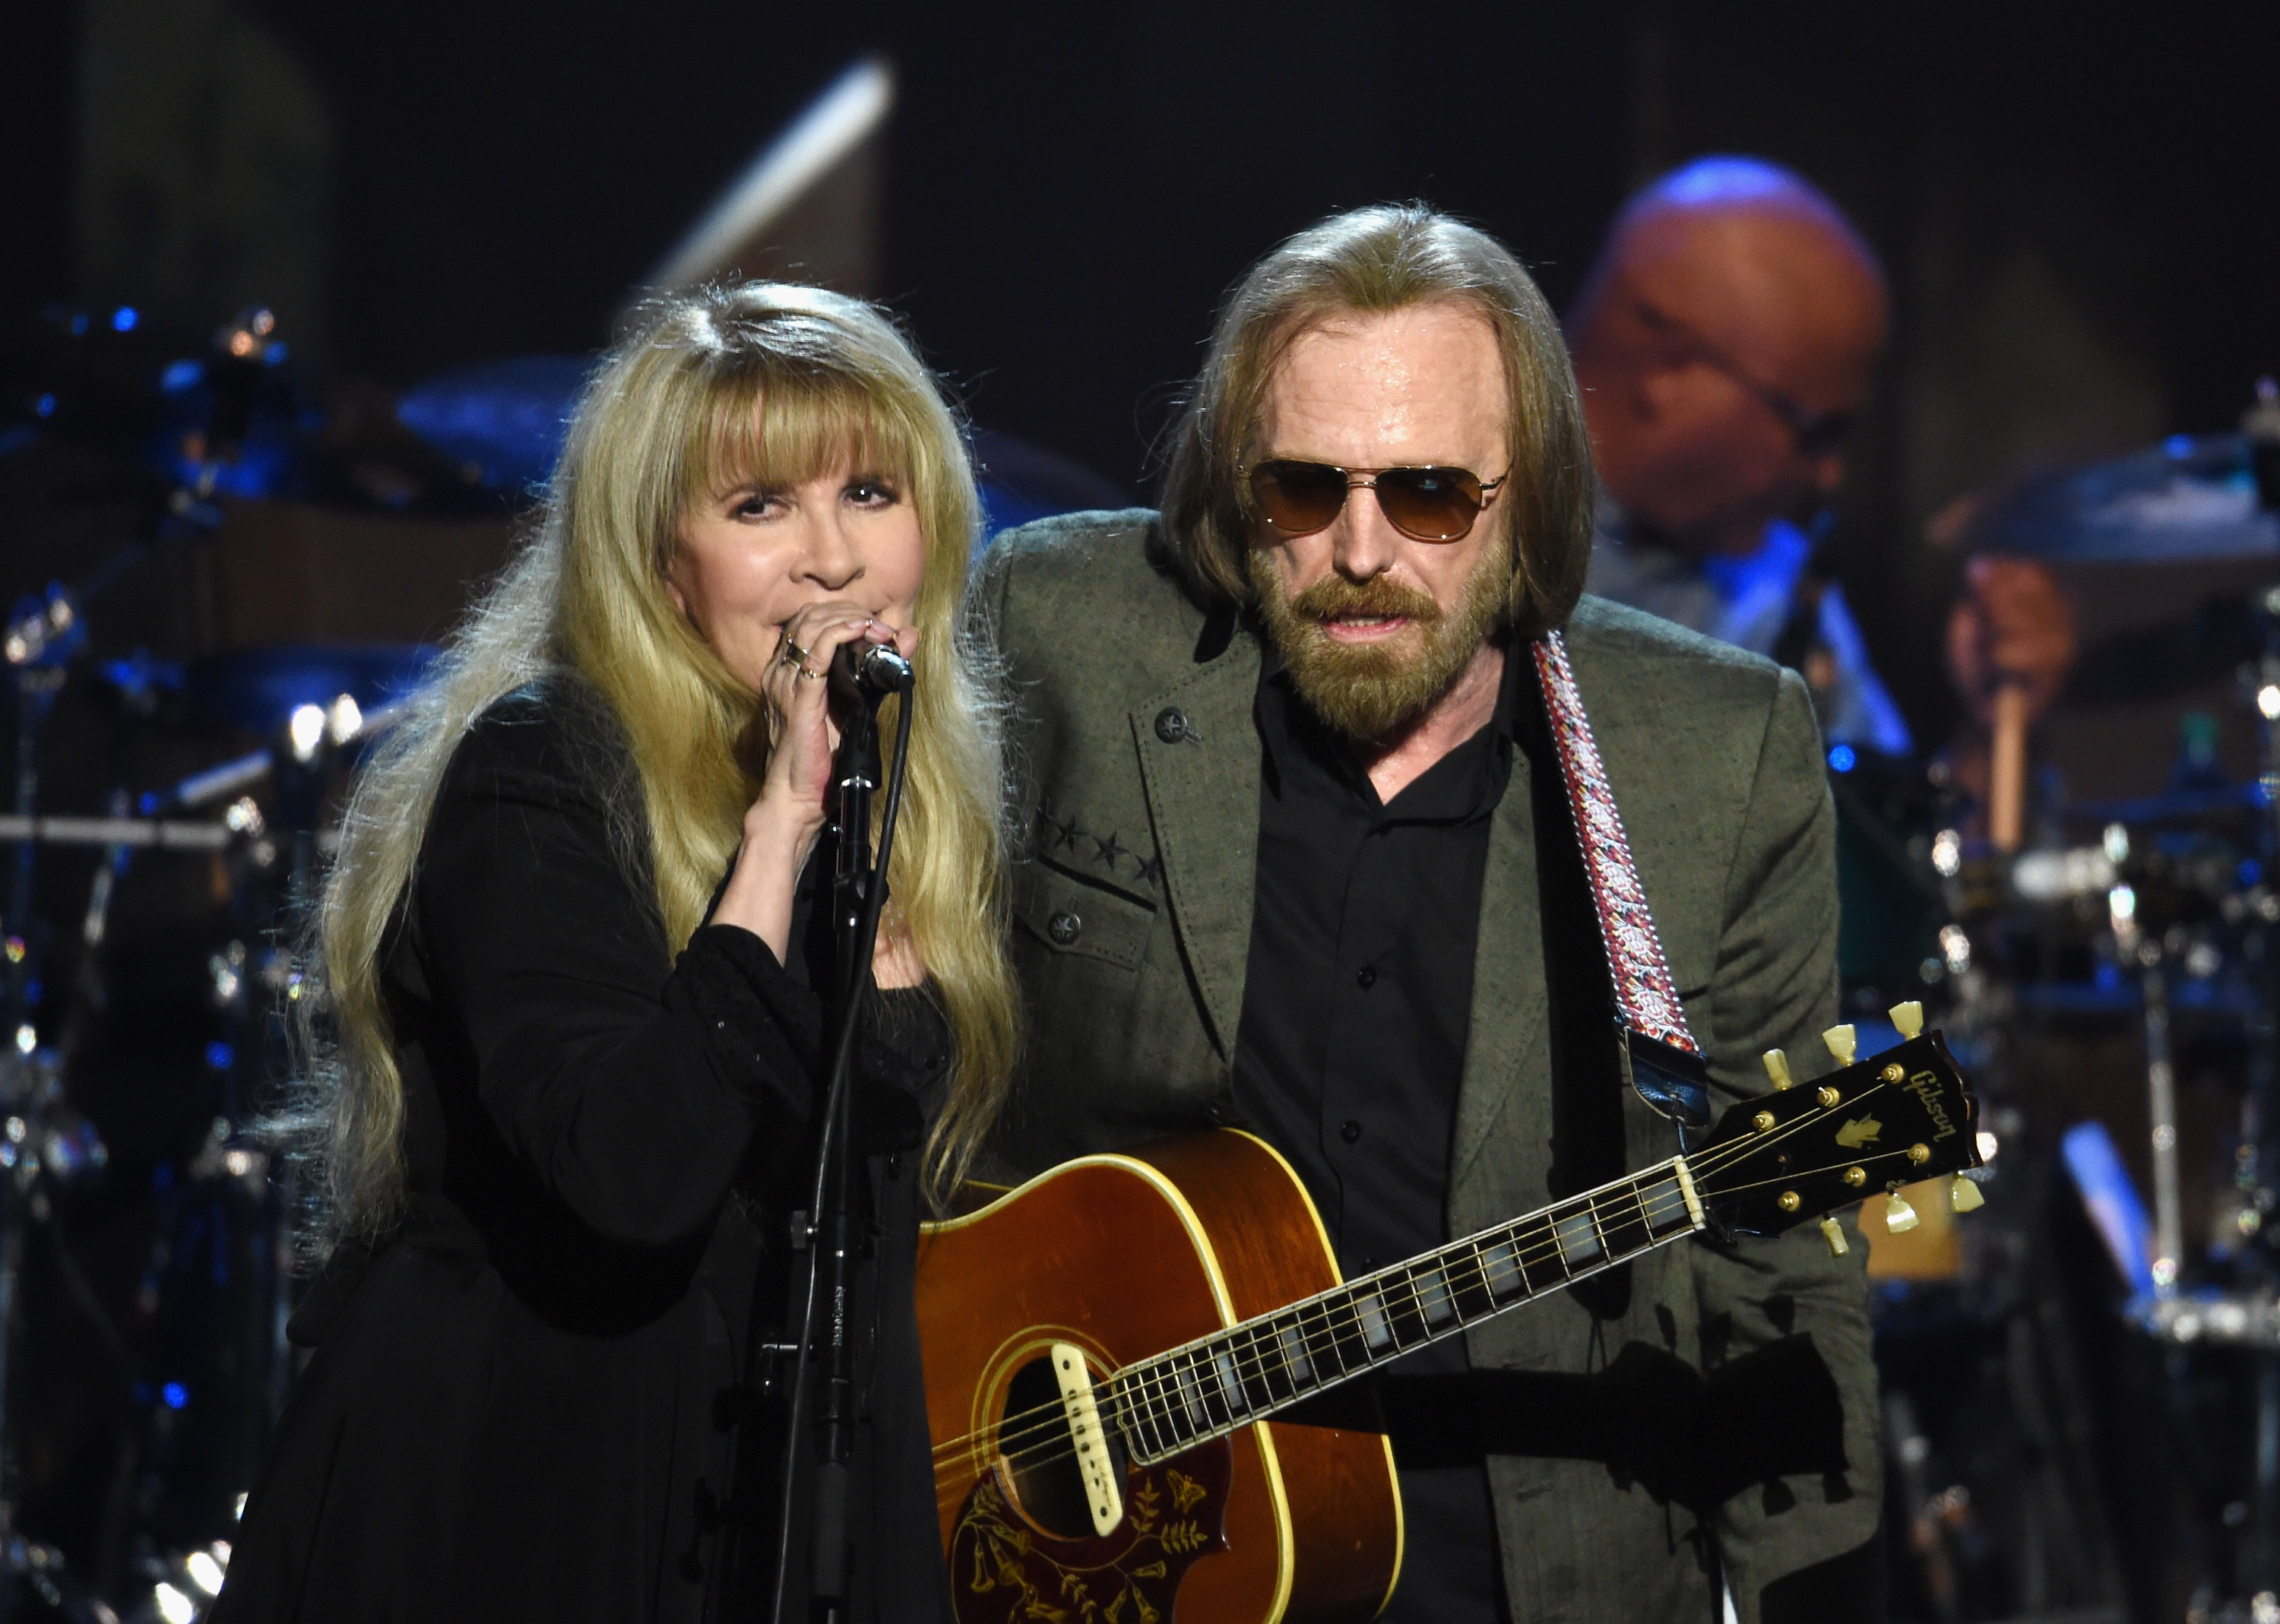 Stevie Nicks in a black dress and Tom Petty in a gray jacket with a guitar.